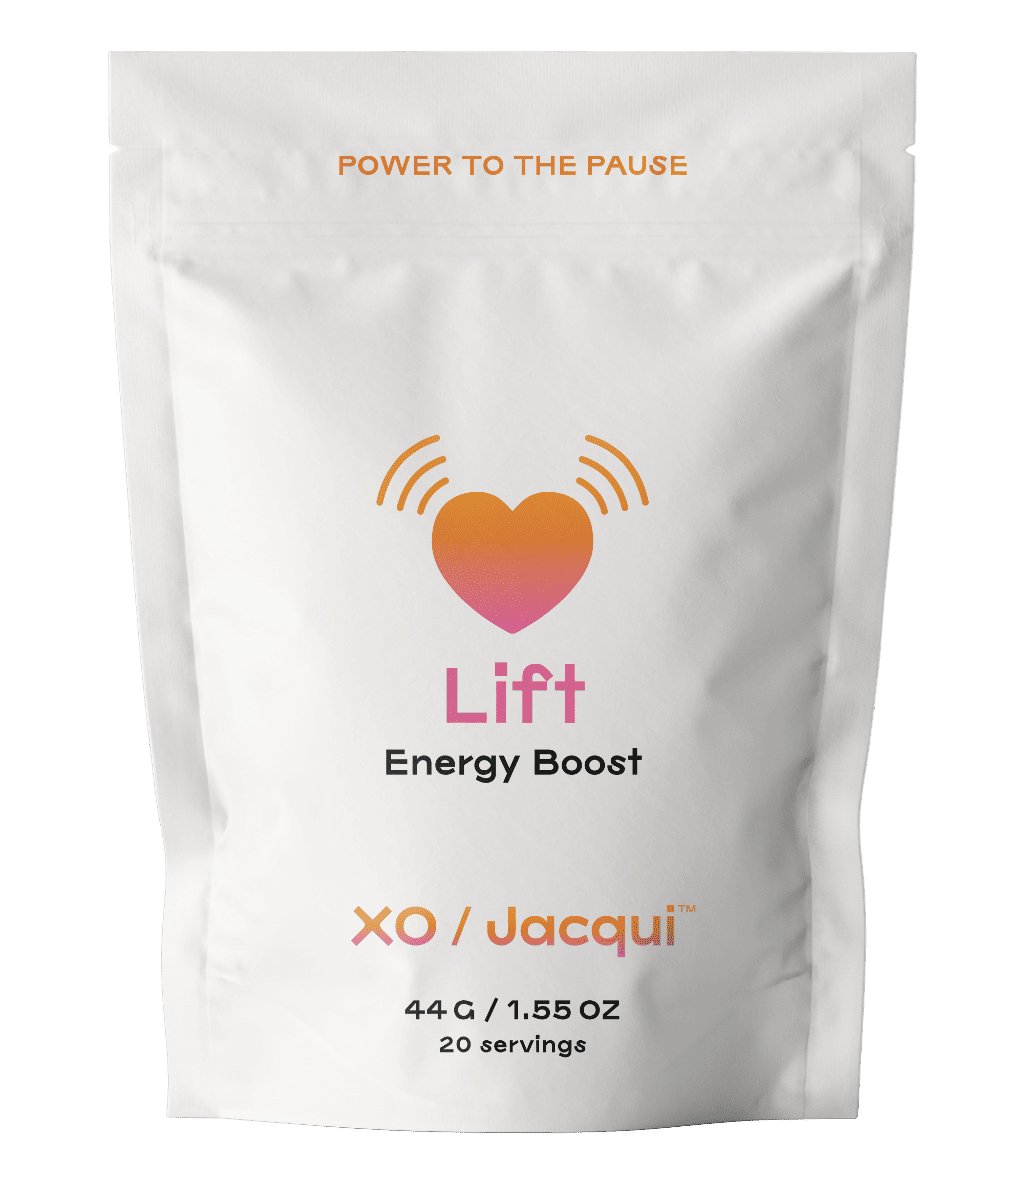 Power to the Pause | Lift Energy Boost | Lift Boost - XO Jacqui